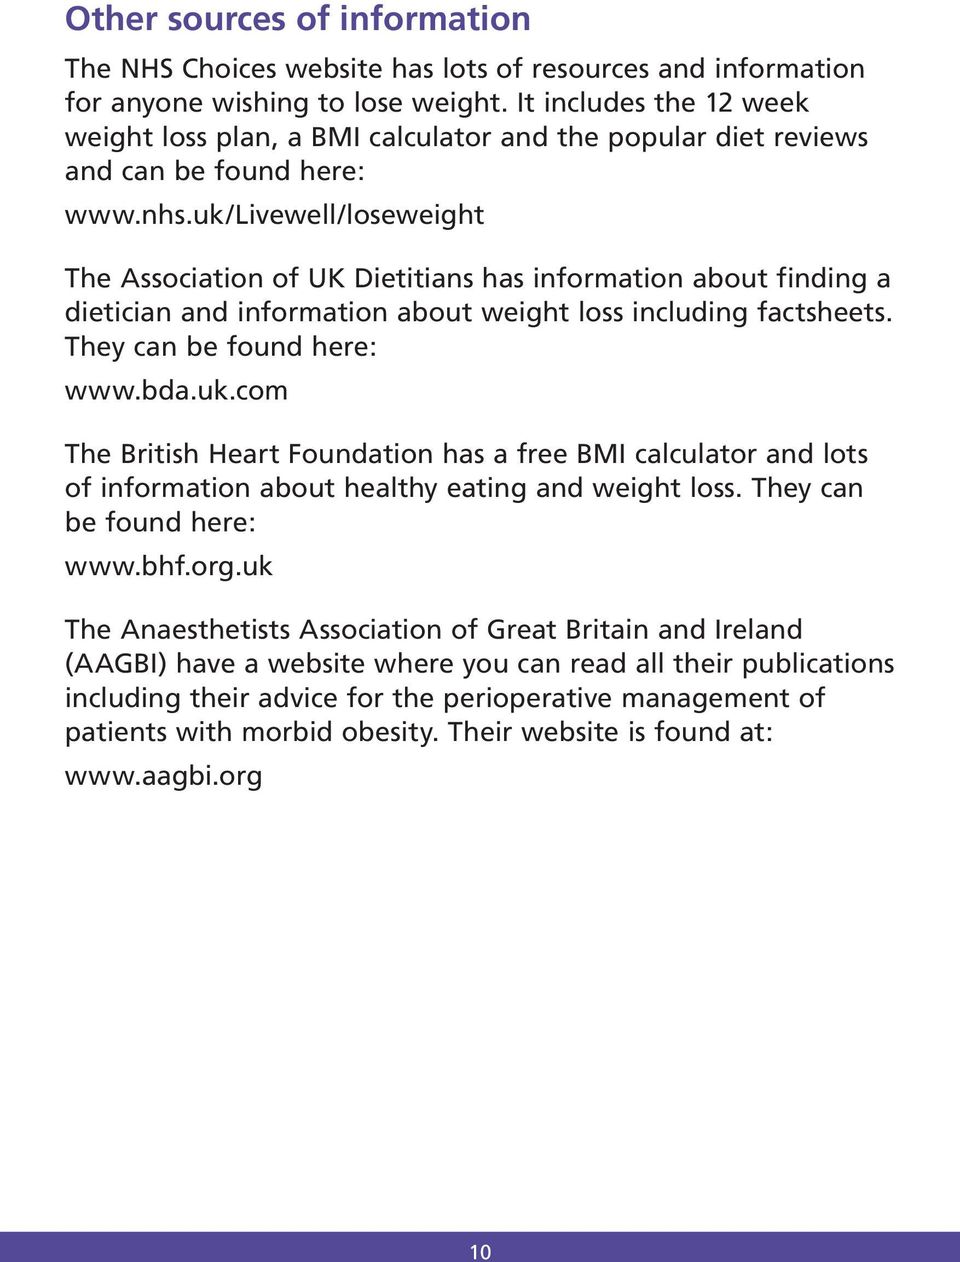 uk/livewell/loseweight The Association of UK Dietitians has information about finding a dietician and information about weight loss including factsheets. They can be found here: www.bda.uk.com The British Heart Foundation has a free BMI calculator and lots of information about healthy eating and weight loss.